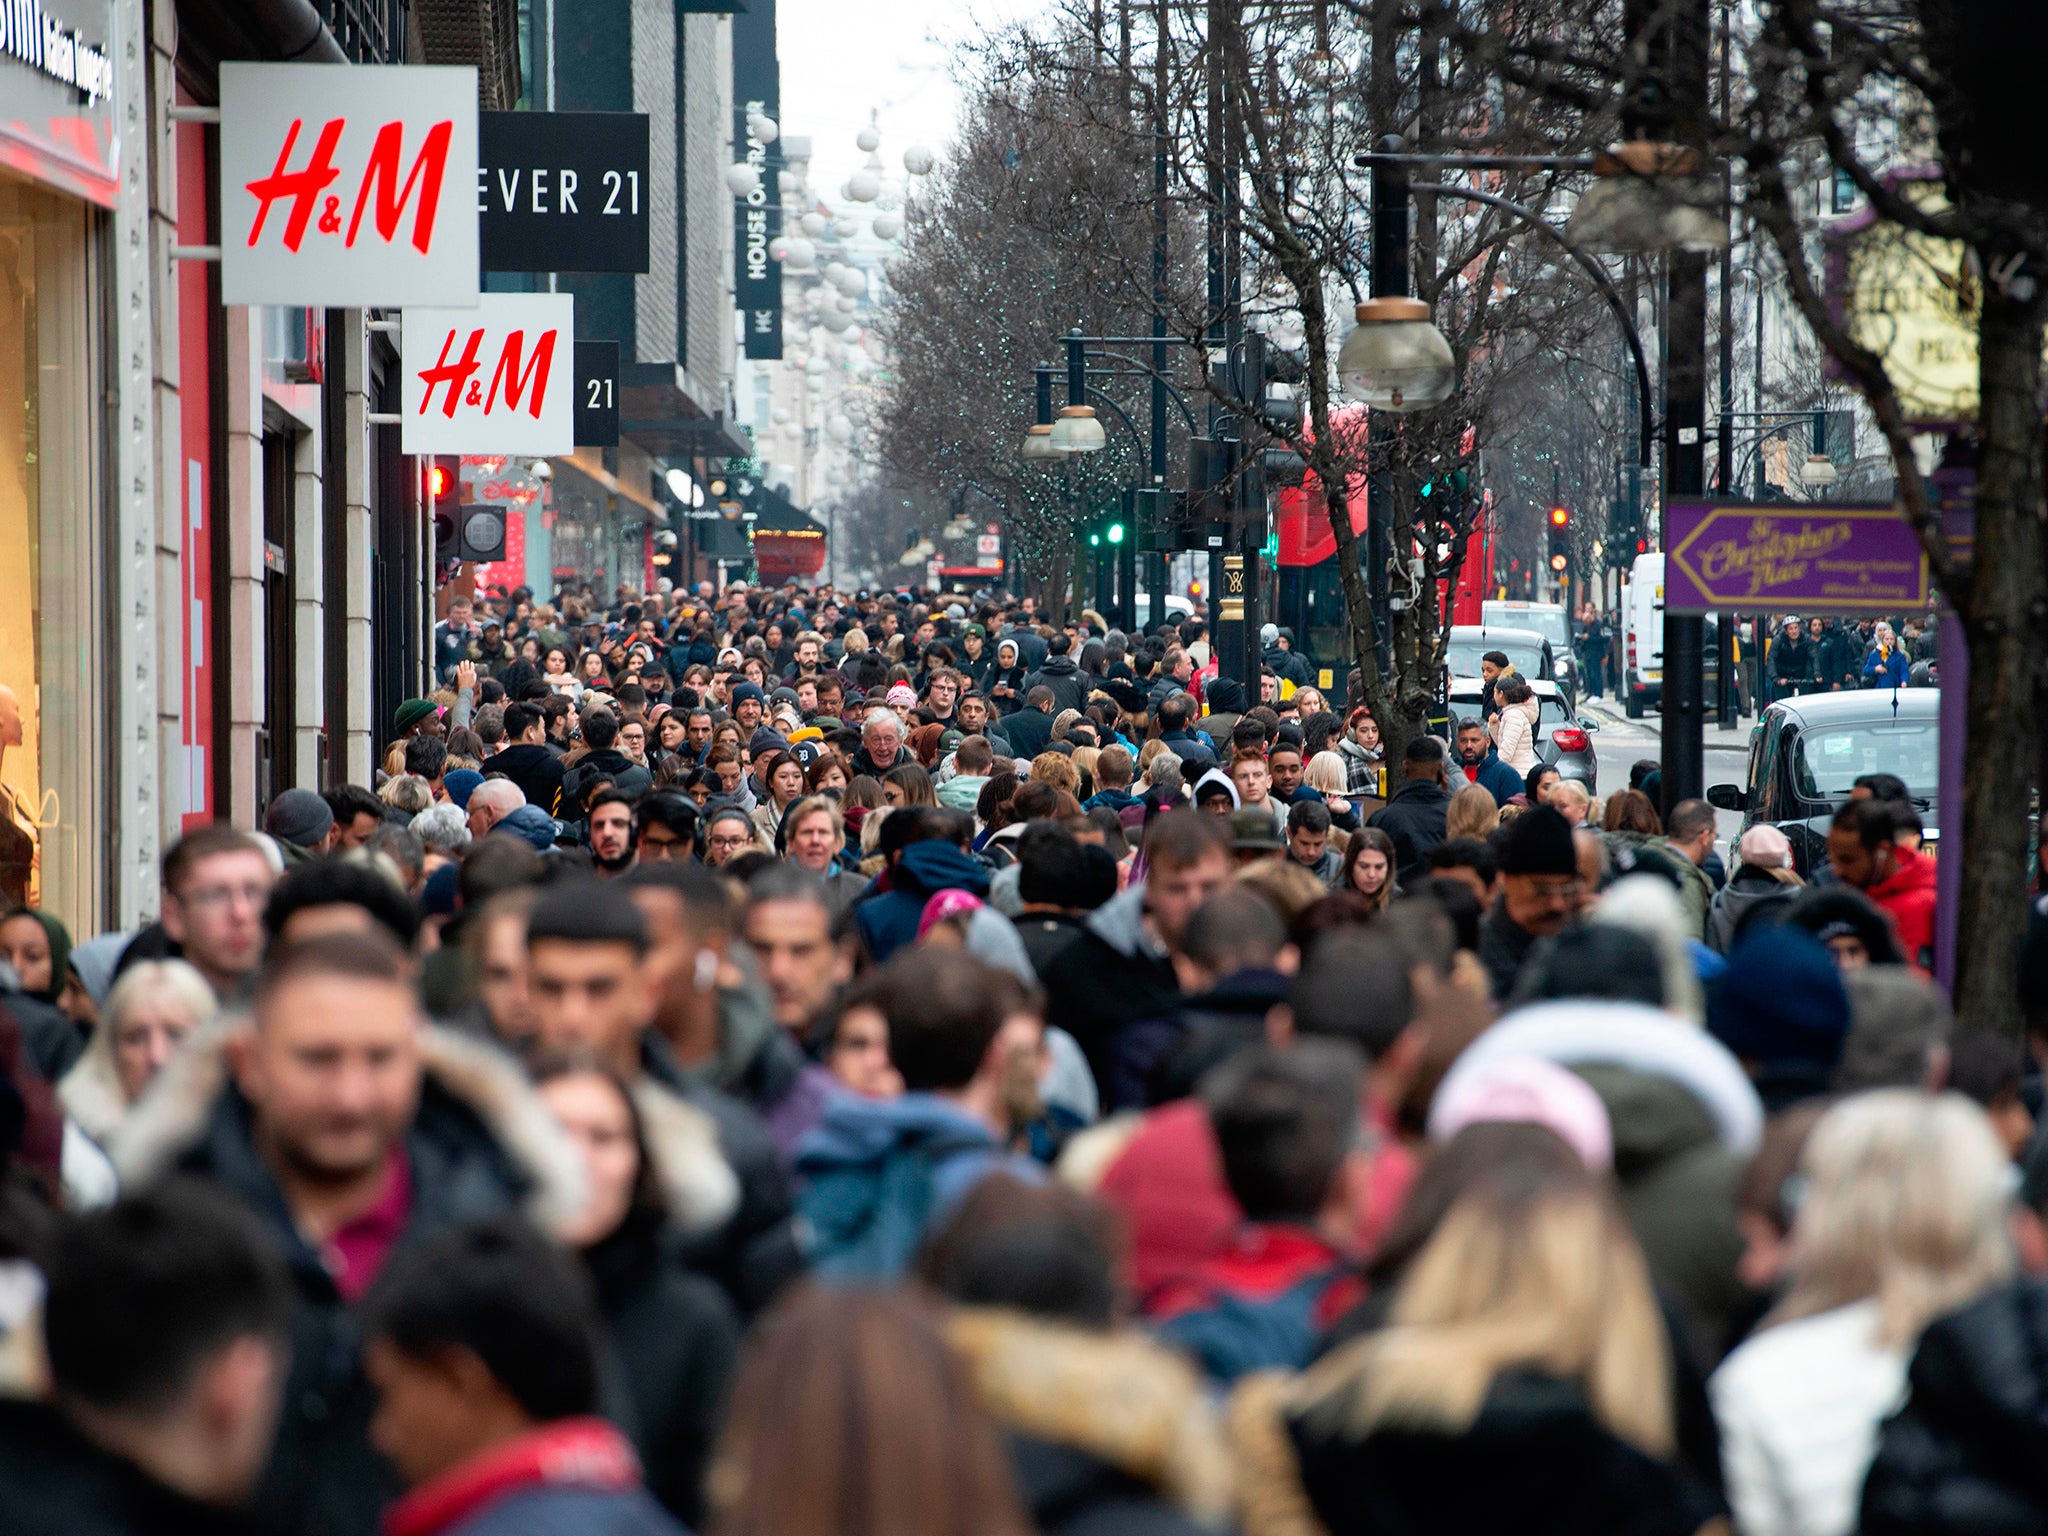 Boxing Day Sales Number Of In Store Shoppers Falls For Third Consecutive Year As Concern For Uk High Street Grows The Independent The Independent,How To Defrost A Turkey Safely